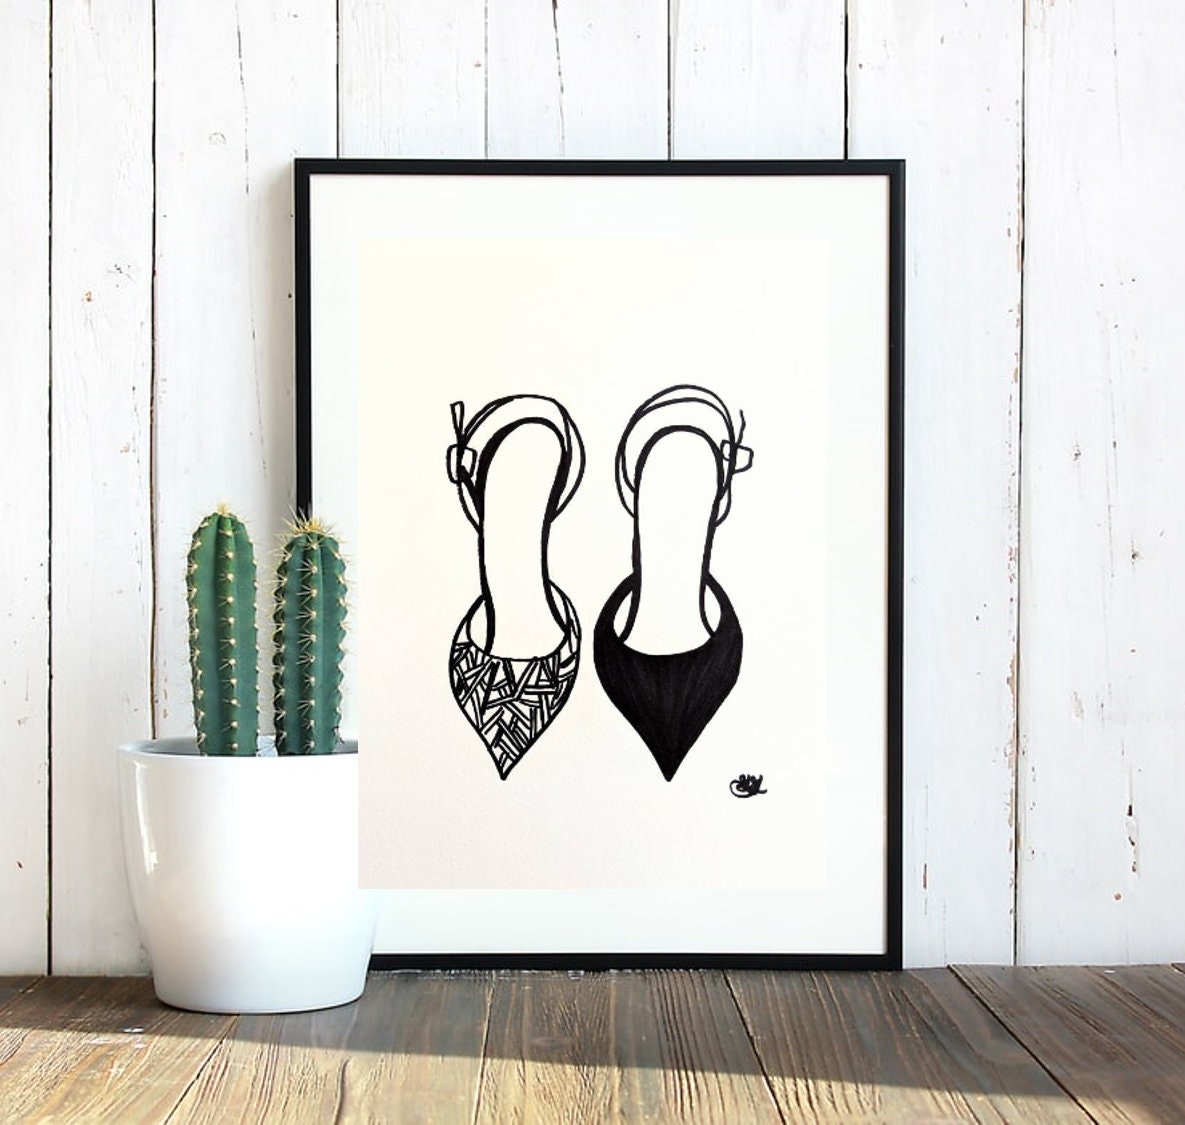 High Heels Distinctive Features Black Marker Drawing of Shoes - Etsy